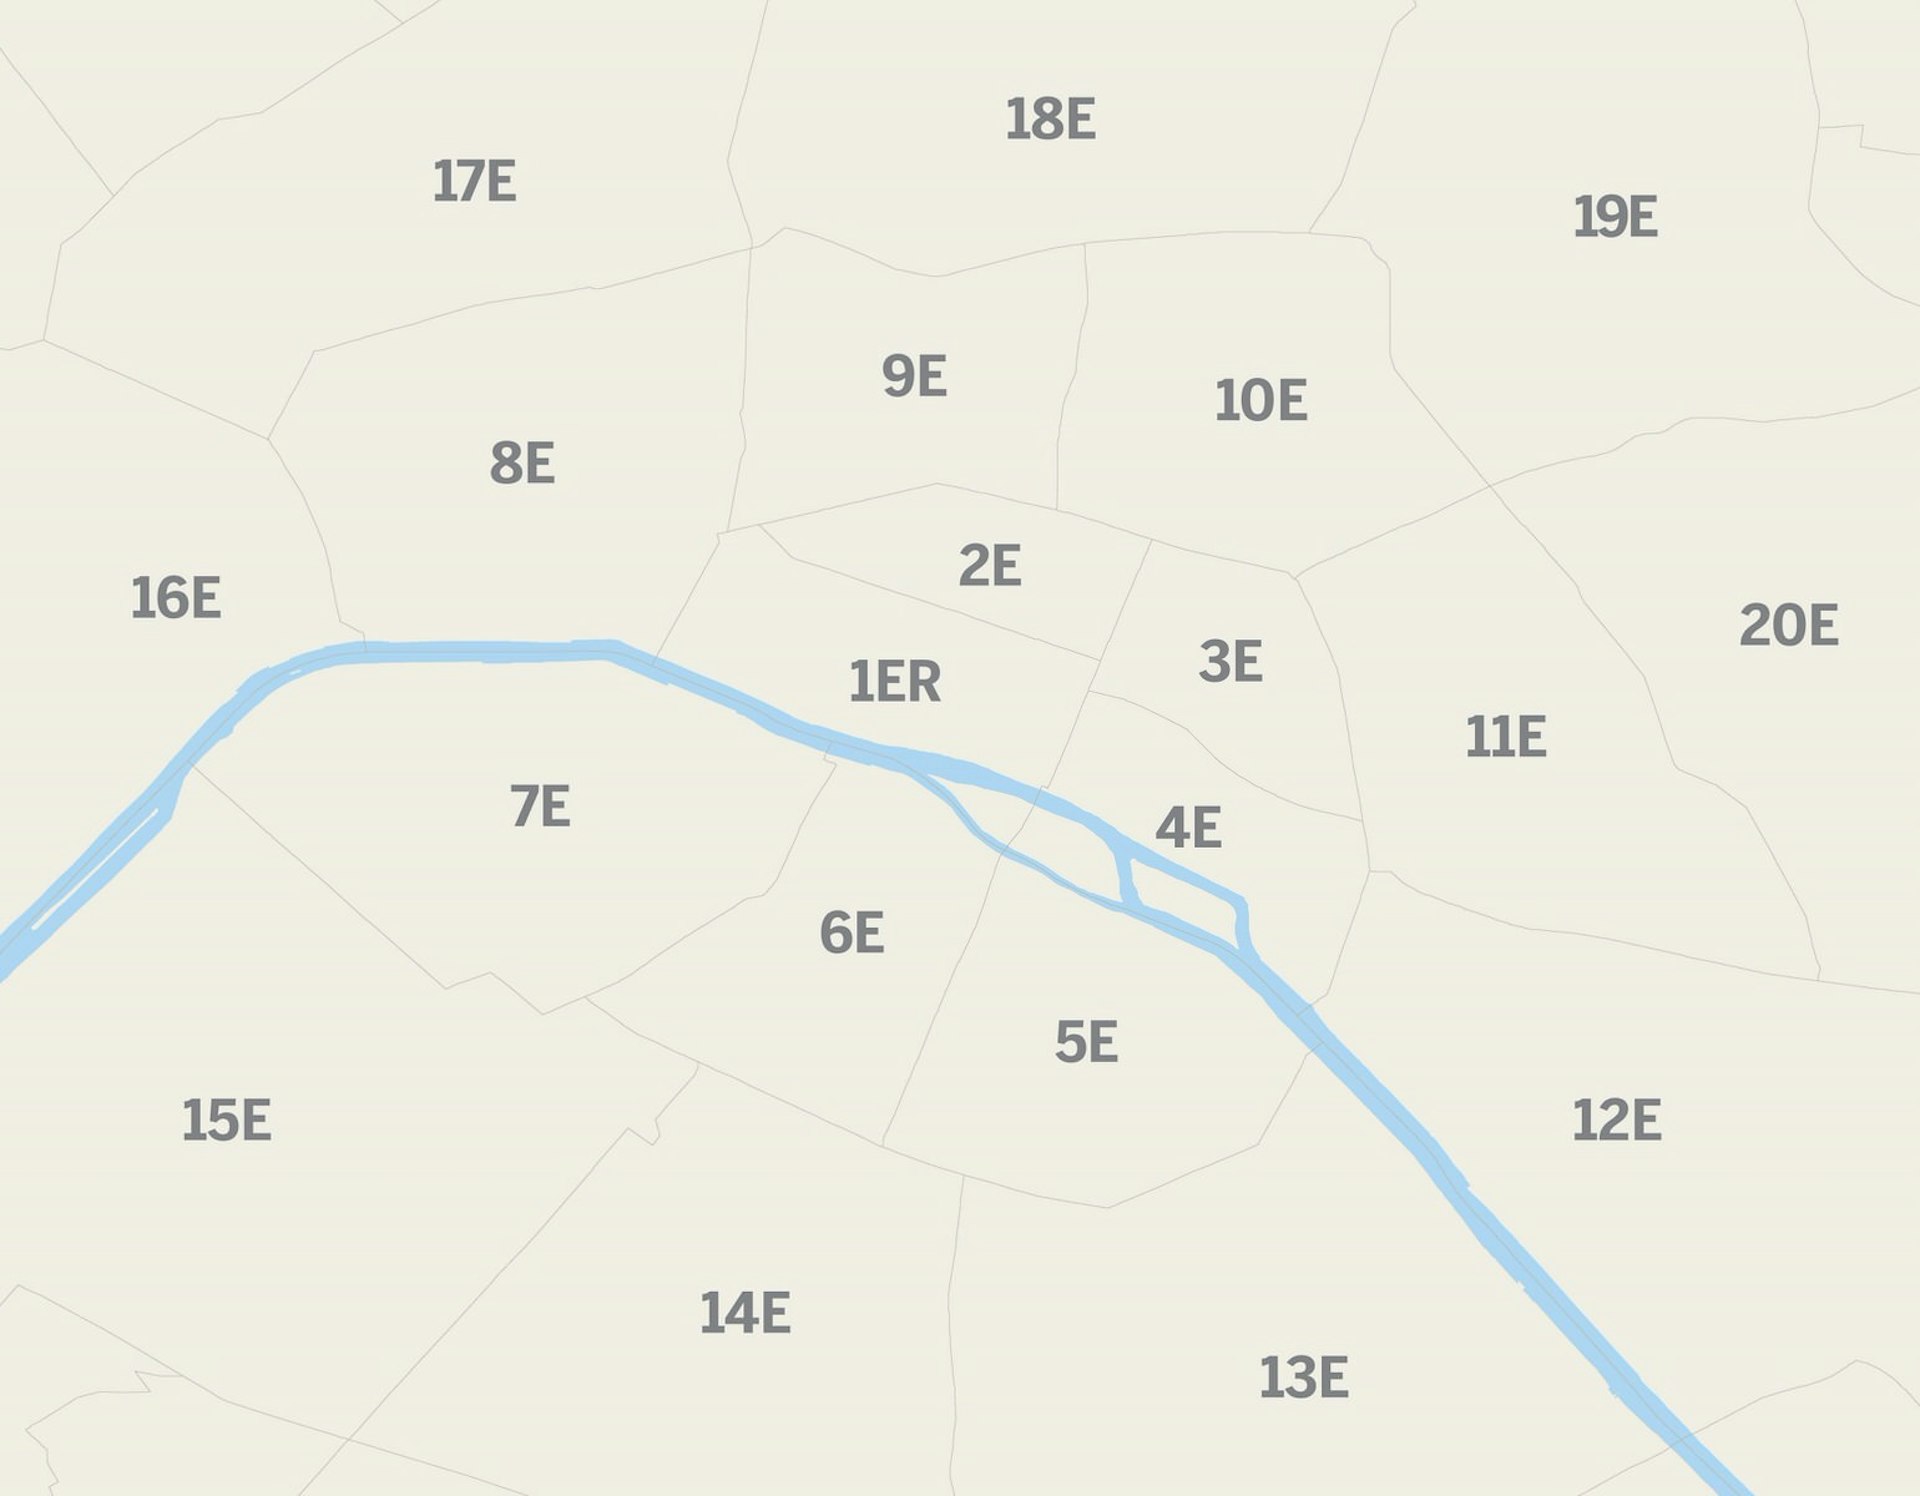 A map of Paris's numbered neighborhoods from 1 to 20 with a river running through the center